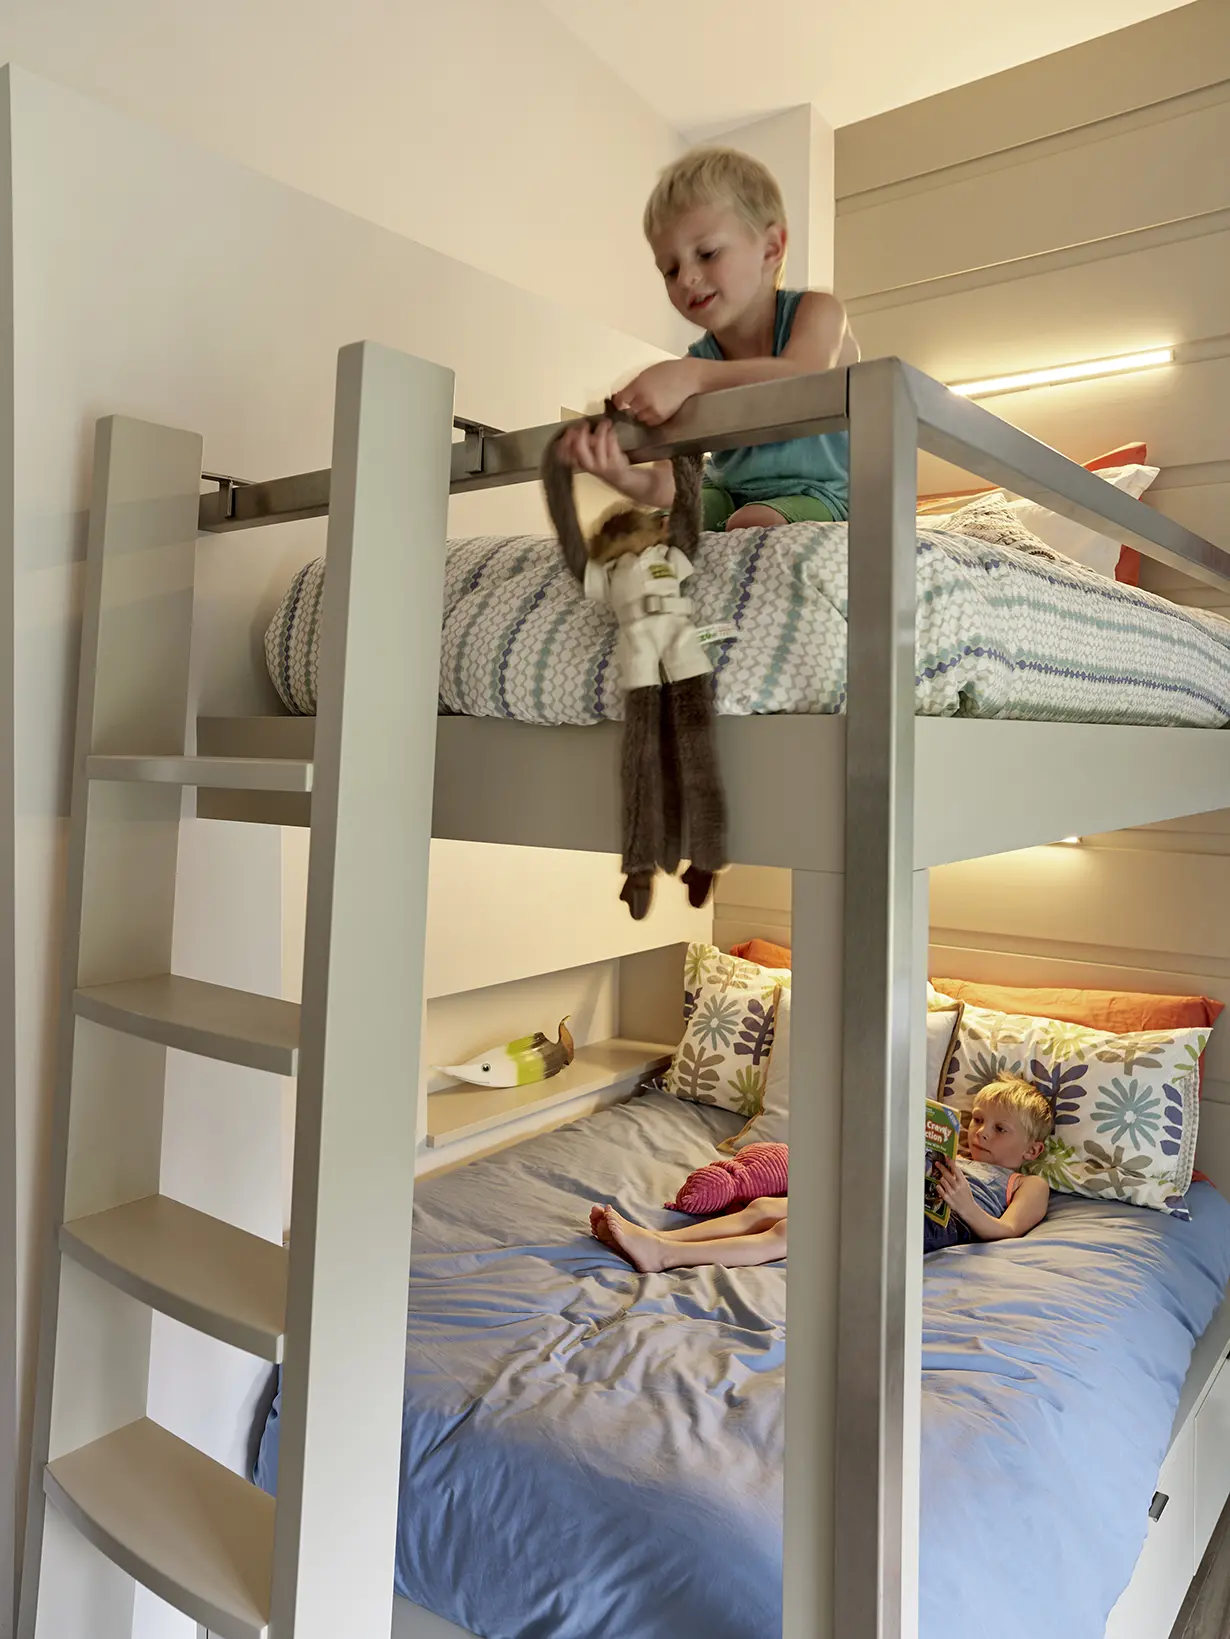 Built in bunkbeds and wood paneling walls